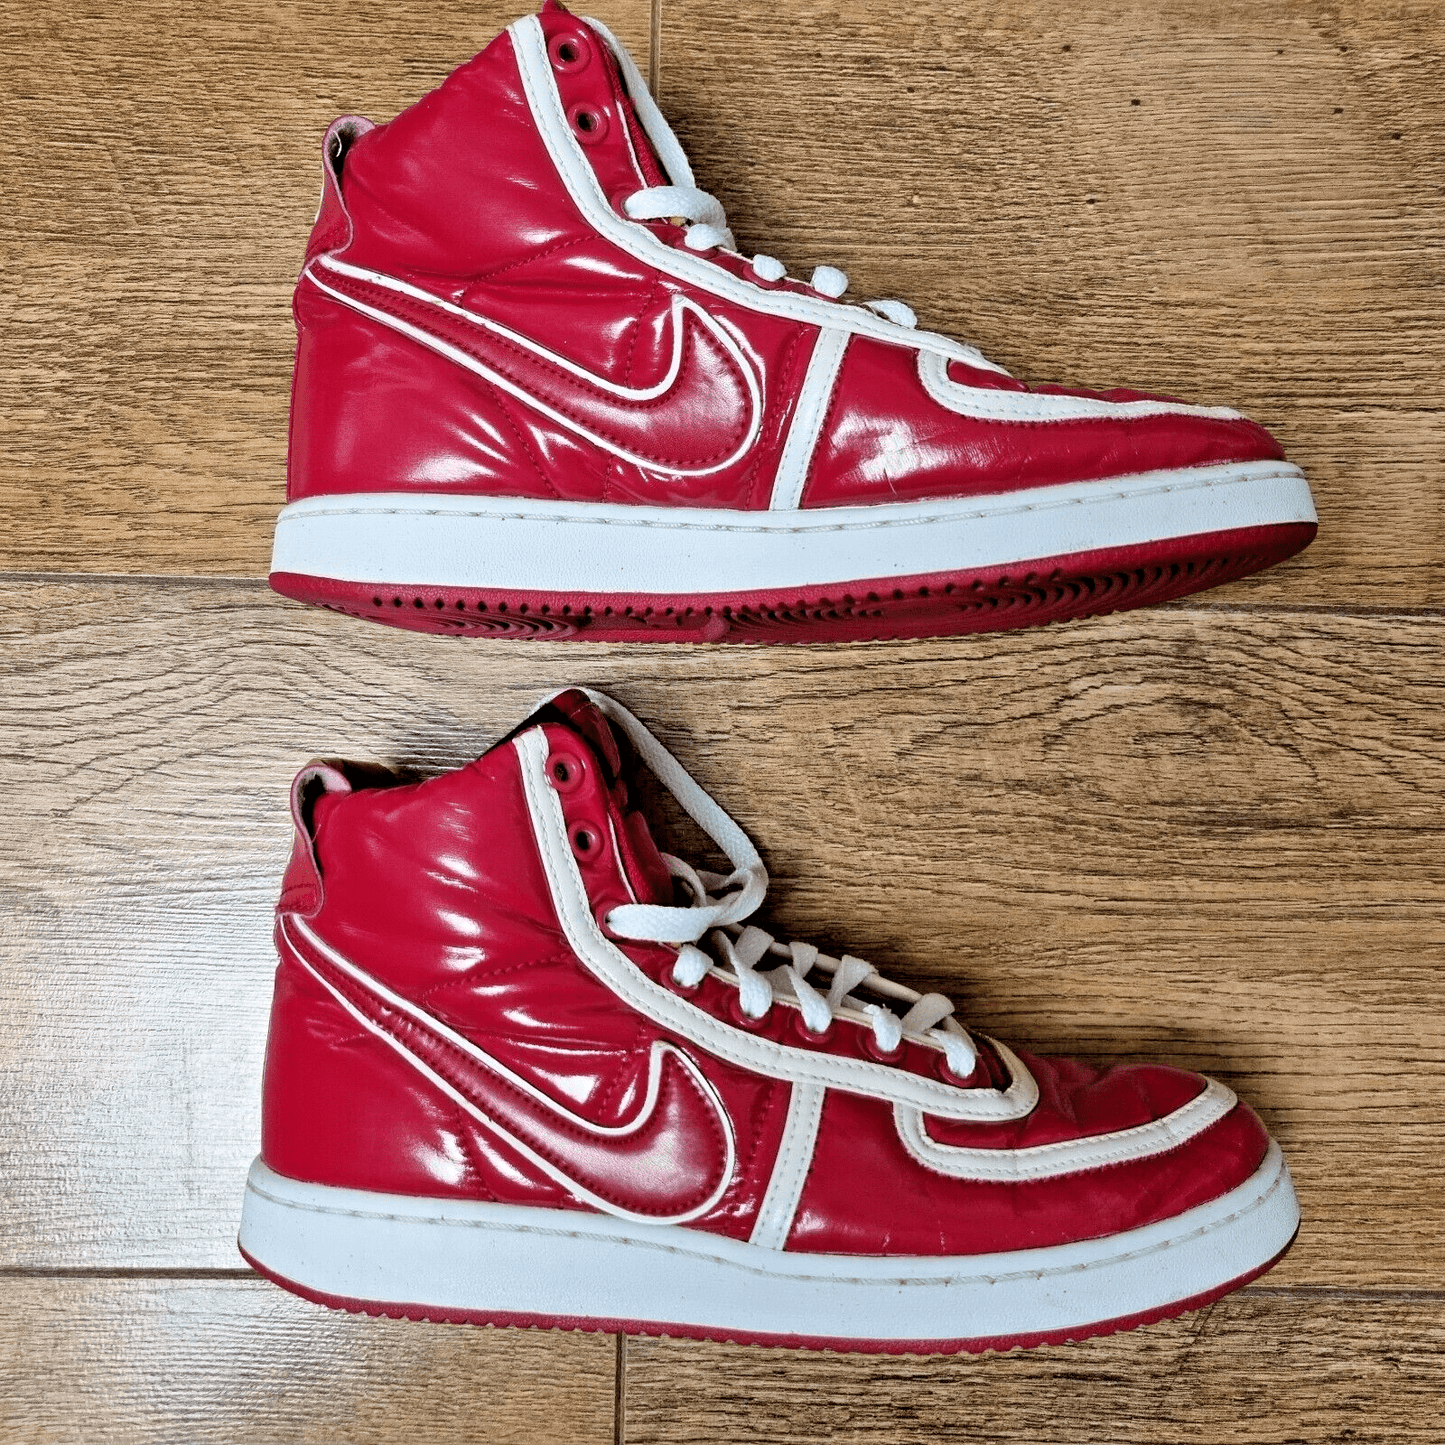 Nike Dunk High Shiny Red Women's Shoes Trainers